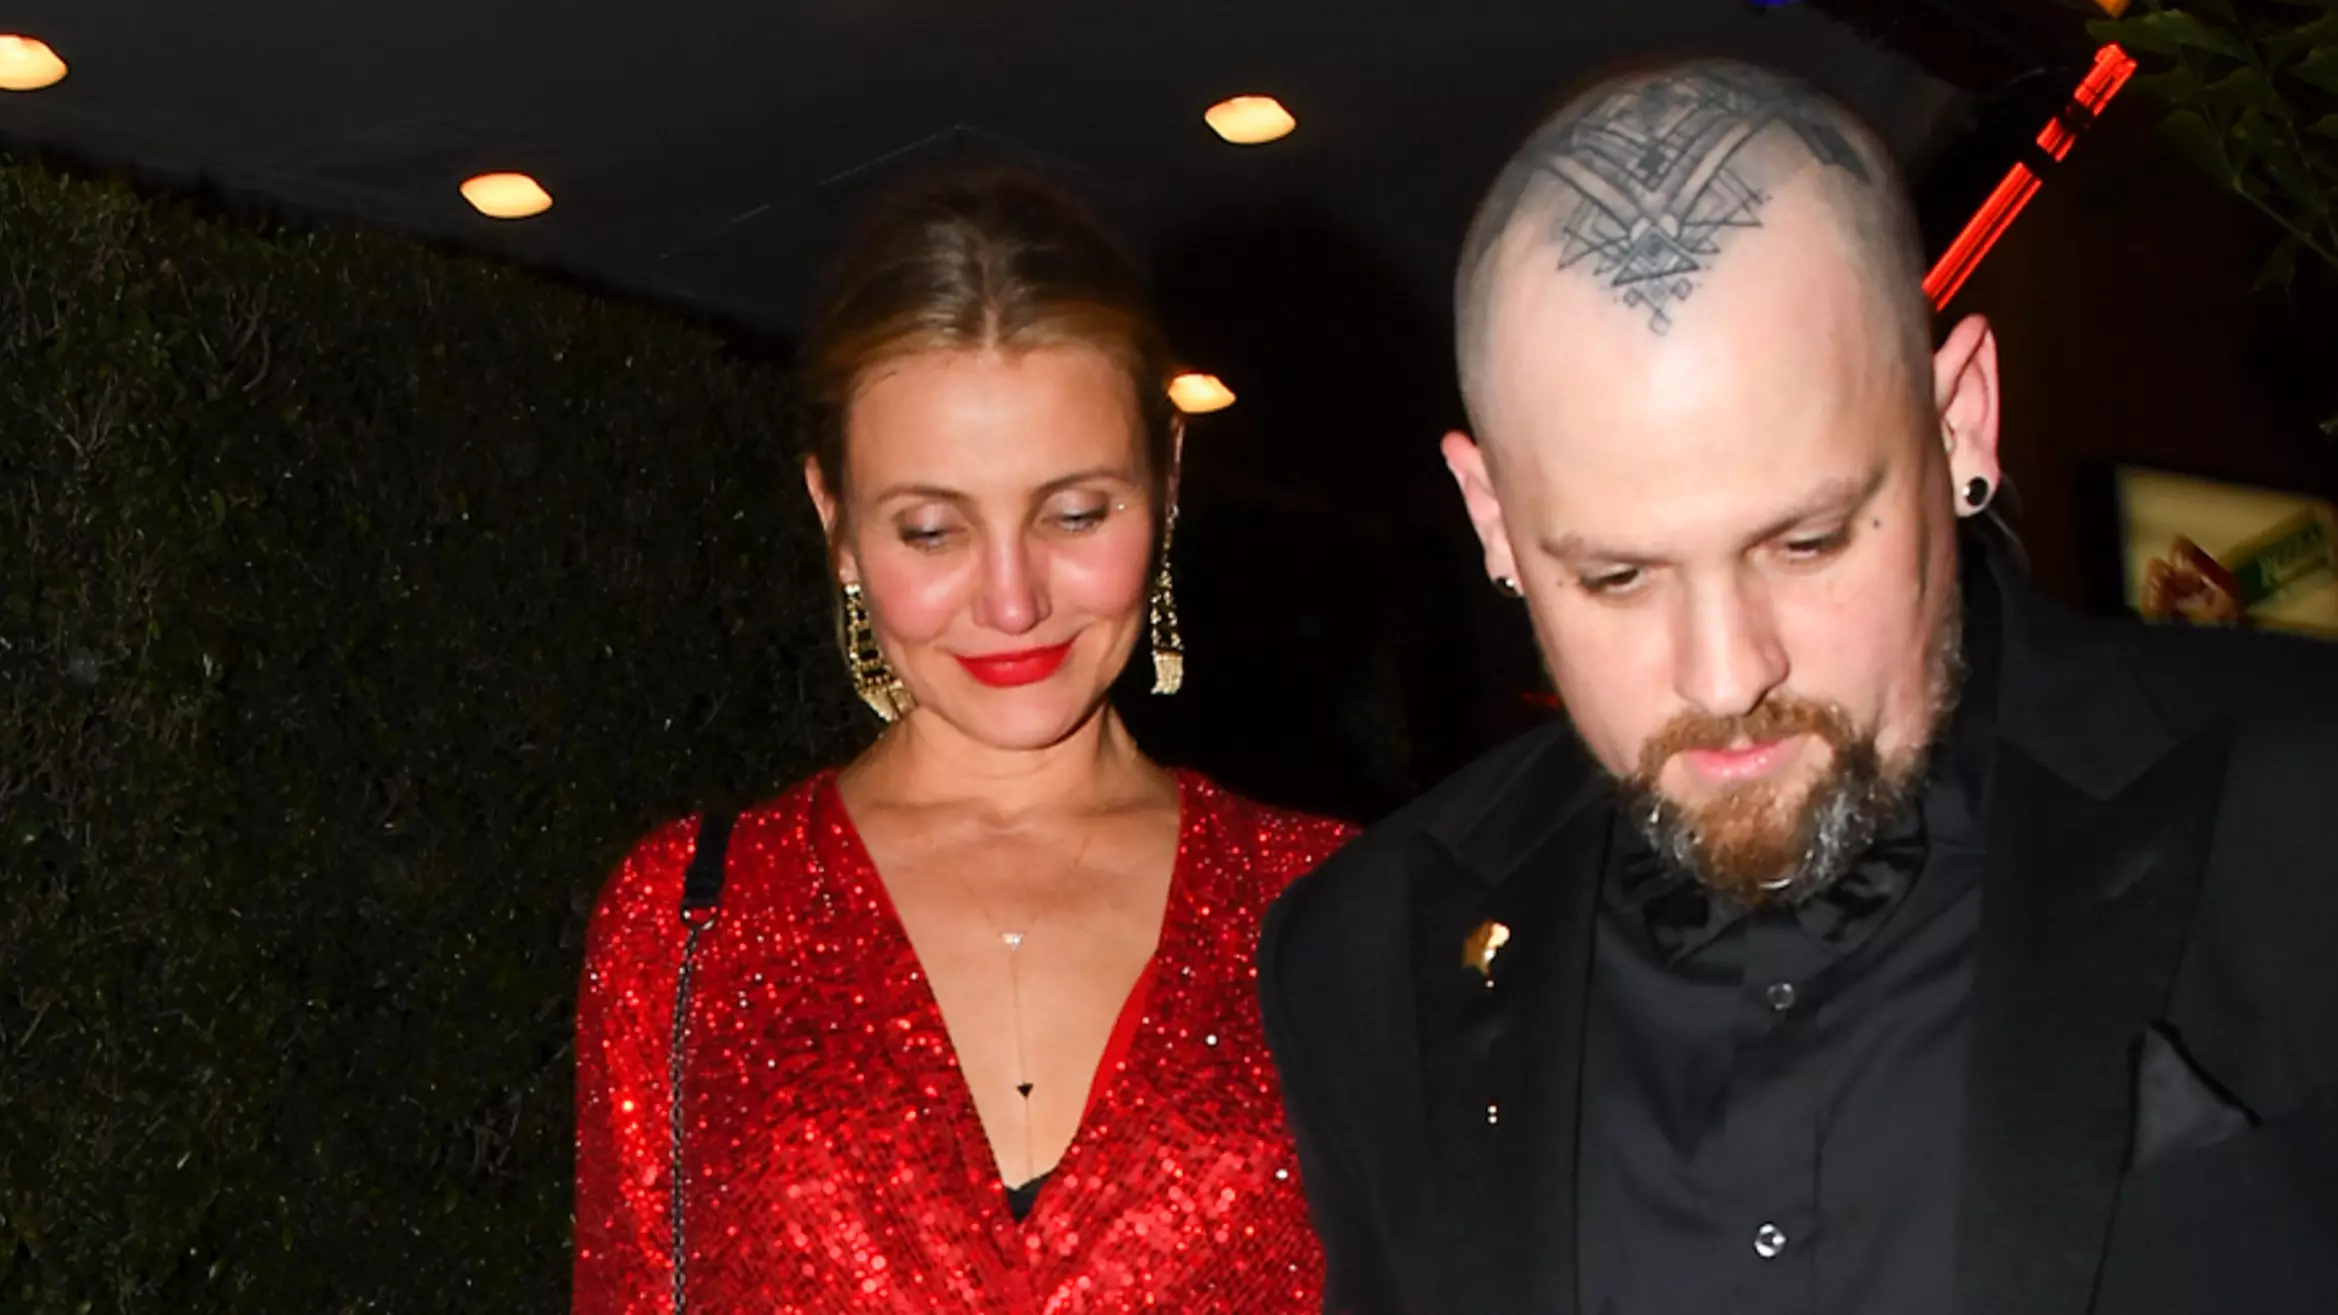 Cameron Diaz And Benji Madden Welcome Baby Daughter.